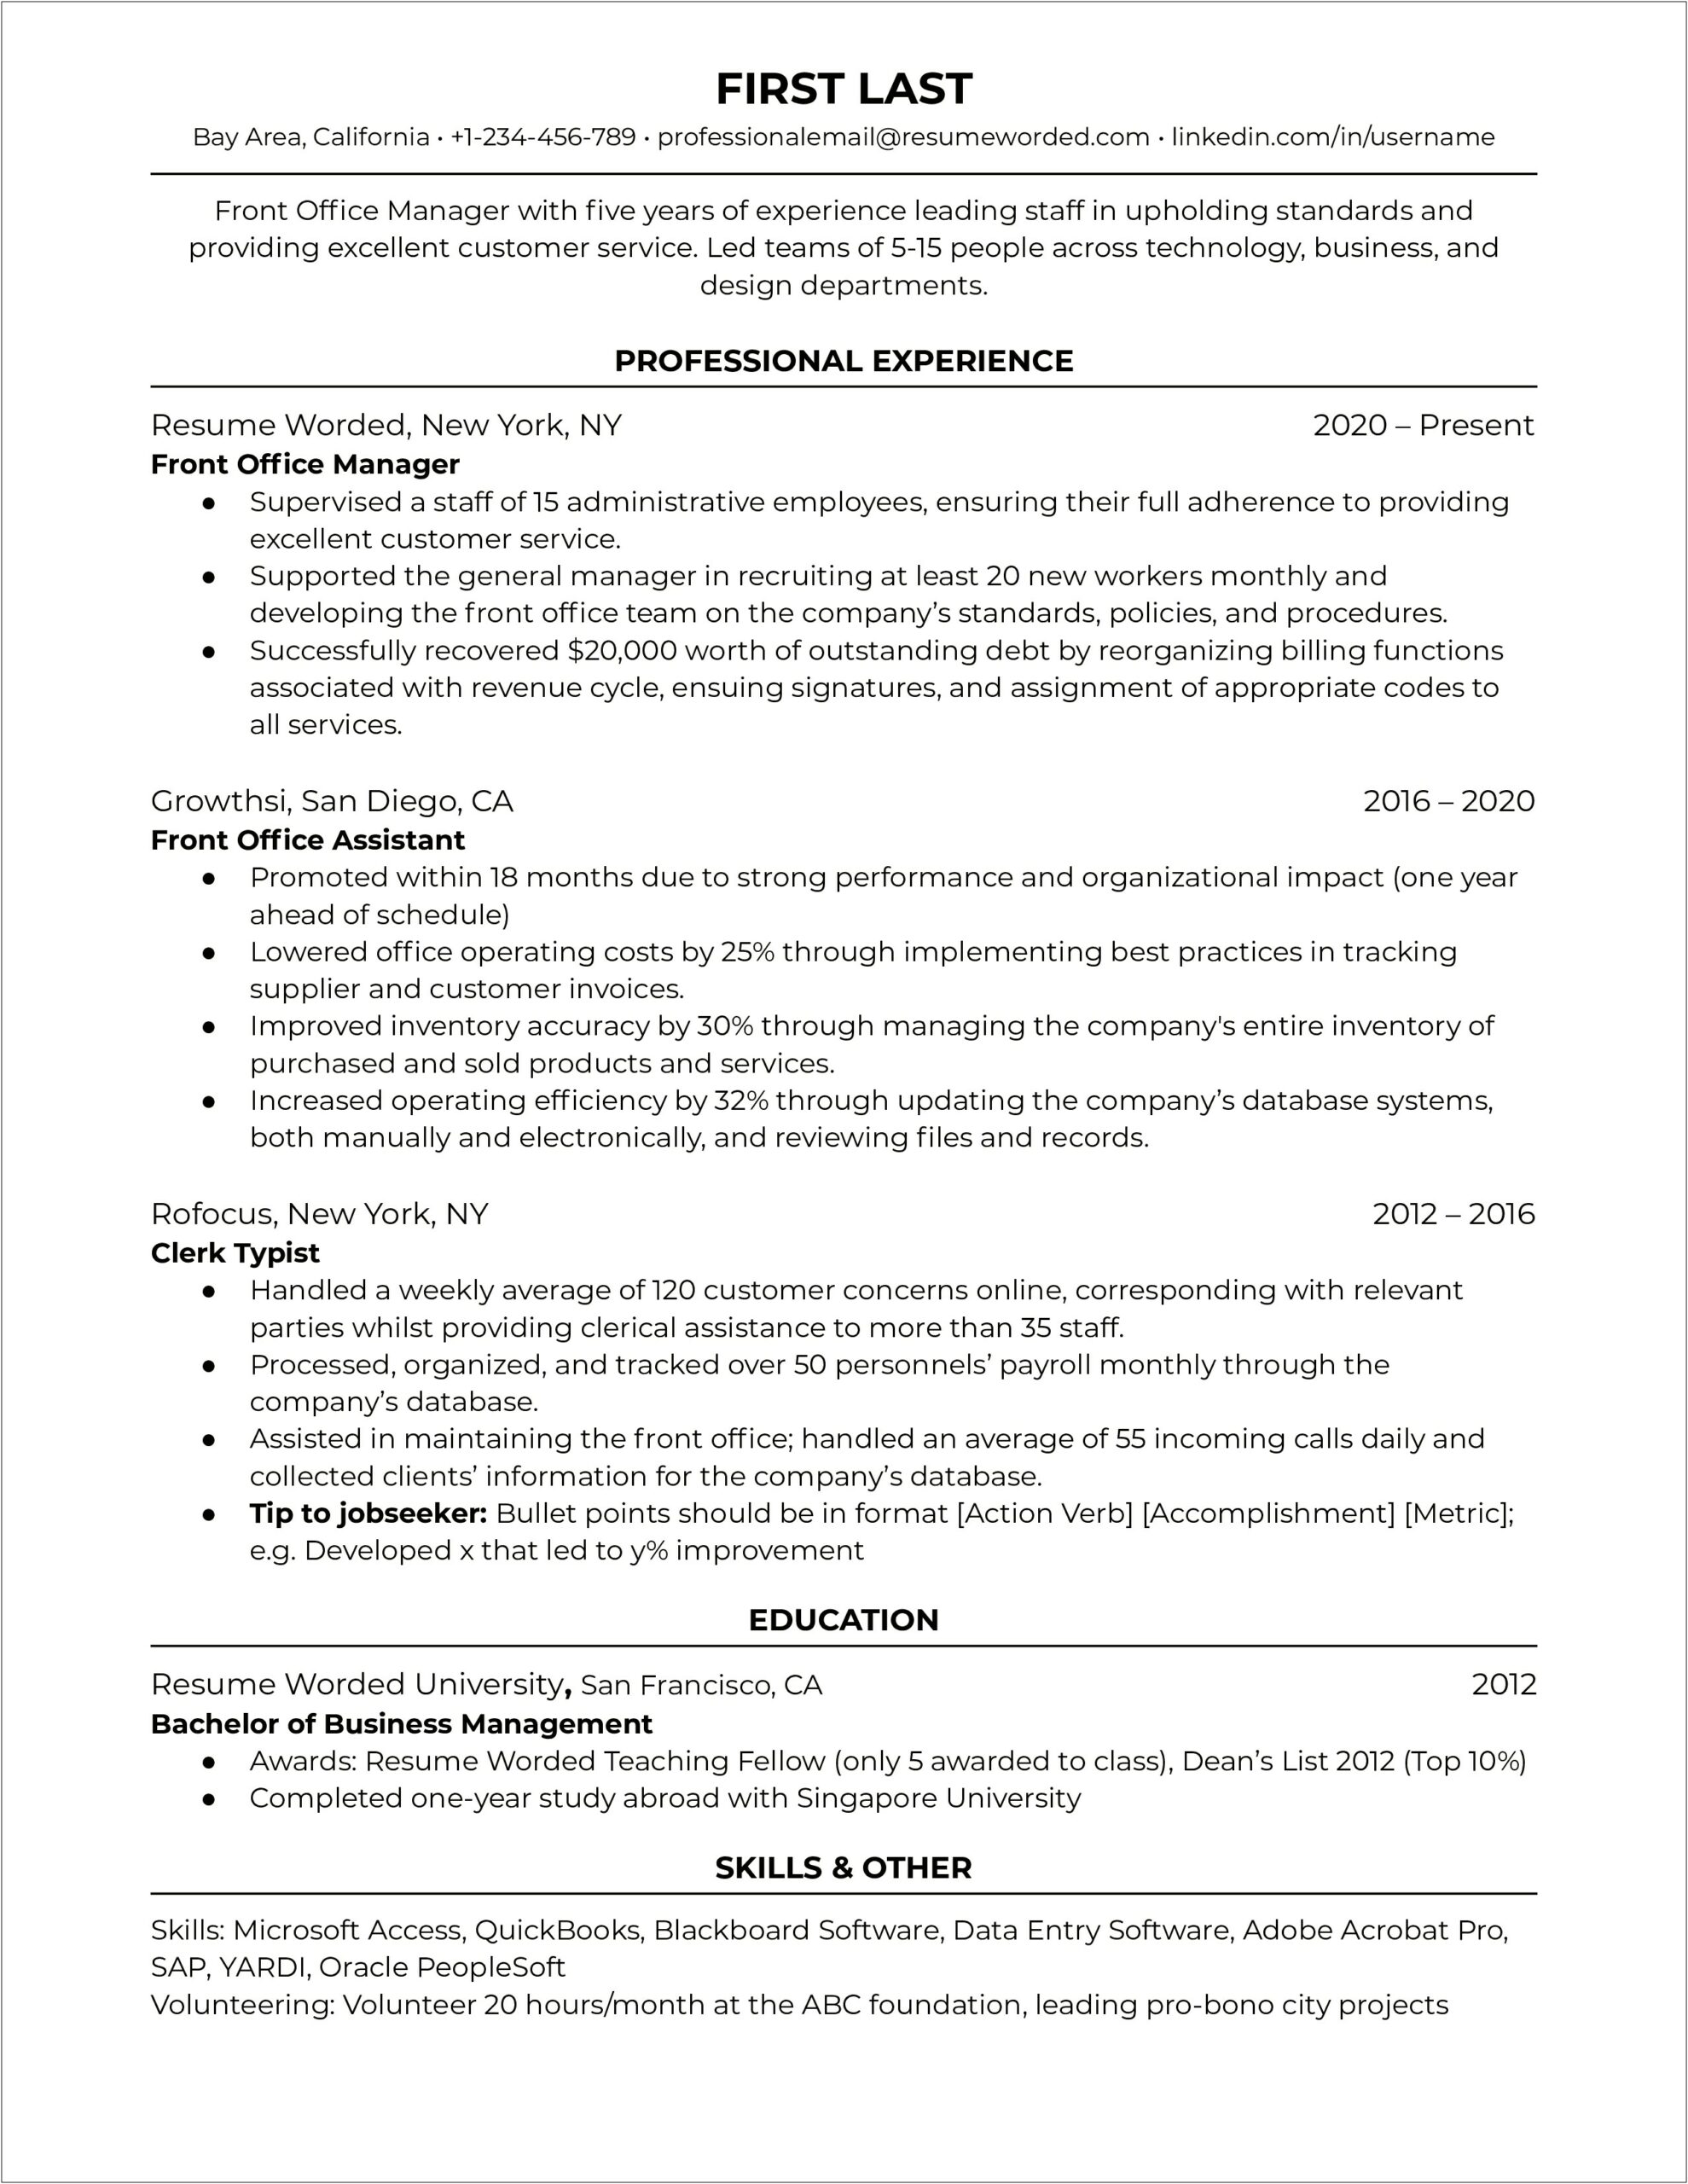 Front Office Operations Manager Resume